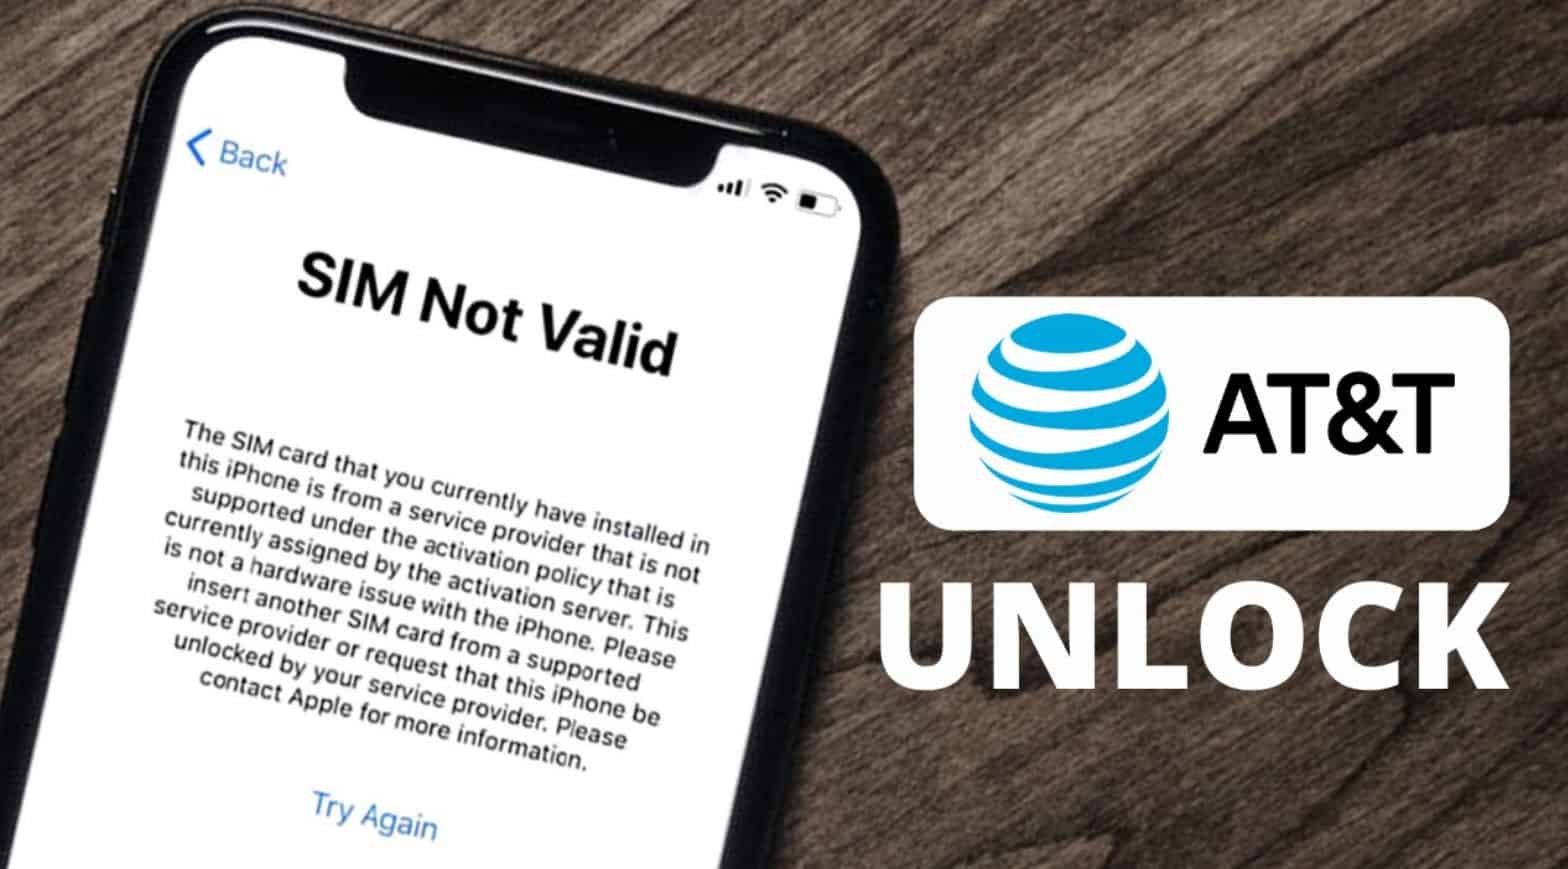 How To Unlock AT&T Phone For Free | AT&T Network Unlock Code Free